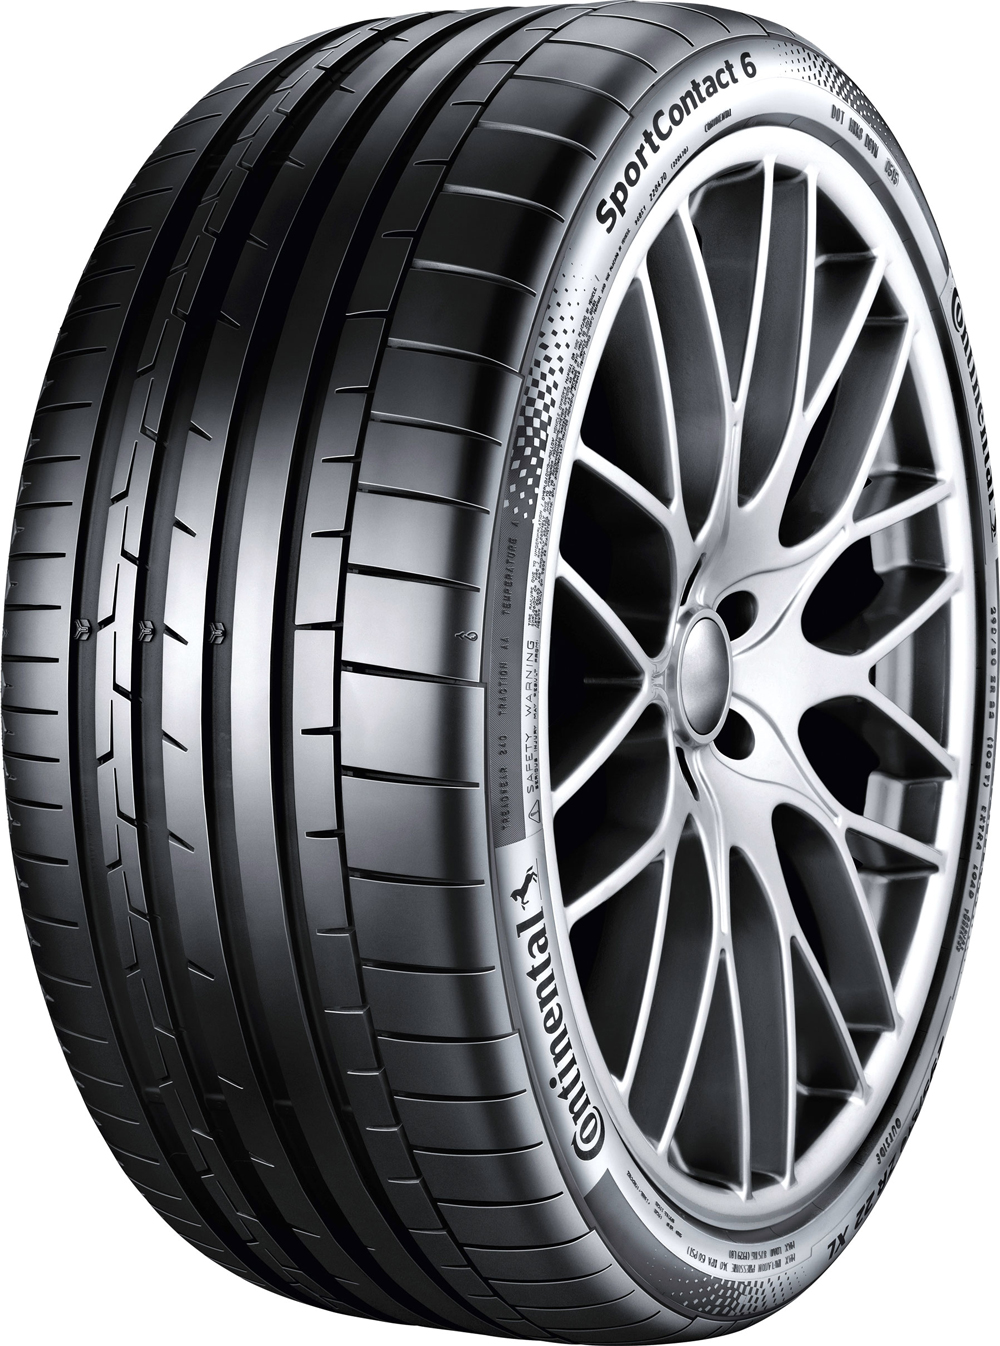 Гуми за кола CONTINENTAL SportContact 6 -S ContiSilent MERCEDES 315/40 R21 111Y